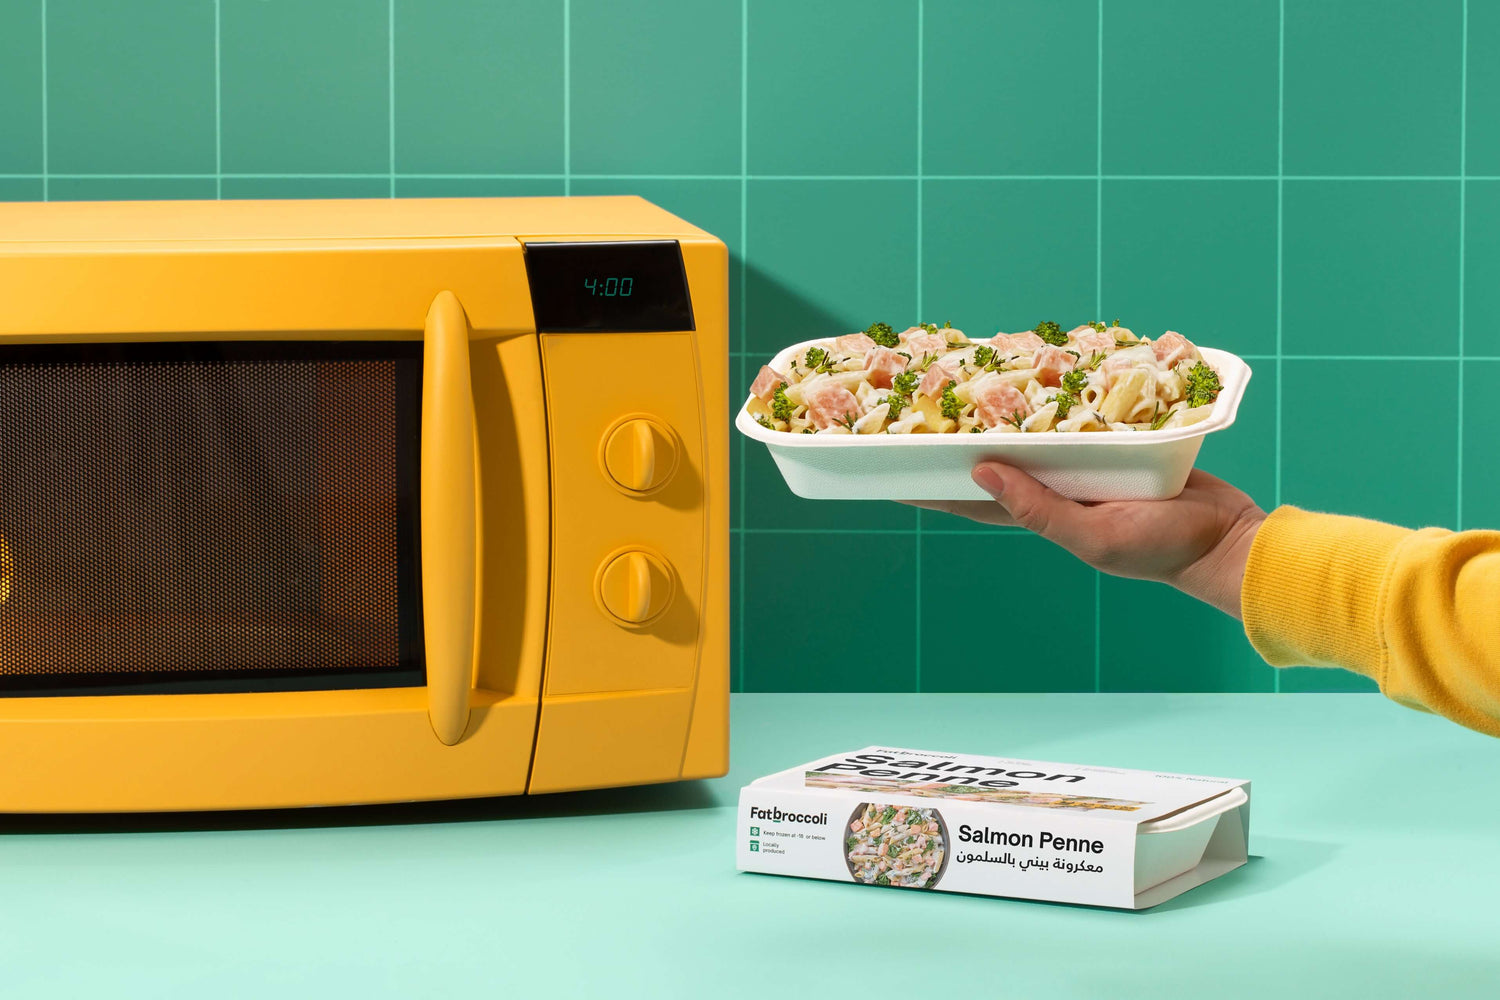 Ready Meals In the Microwave